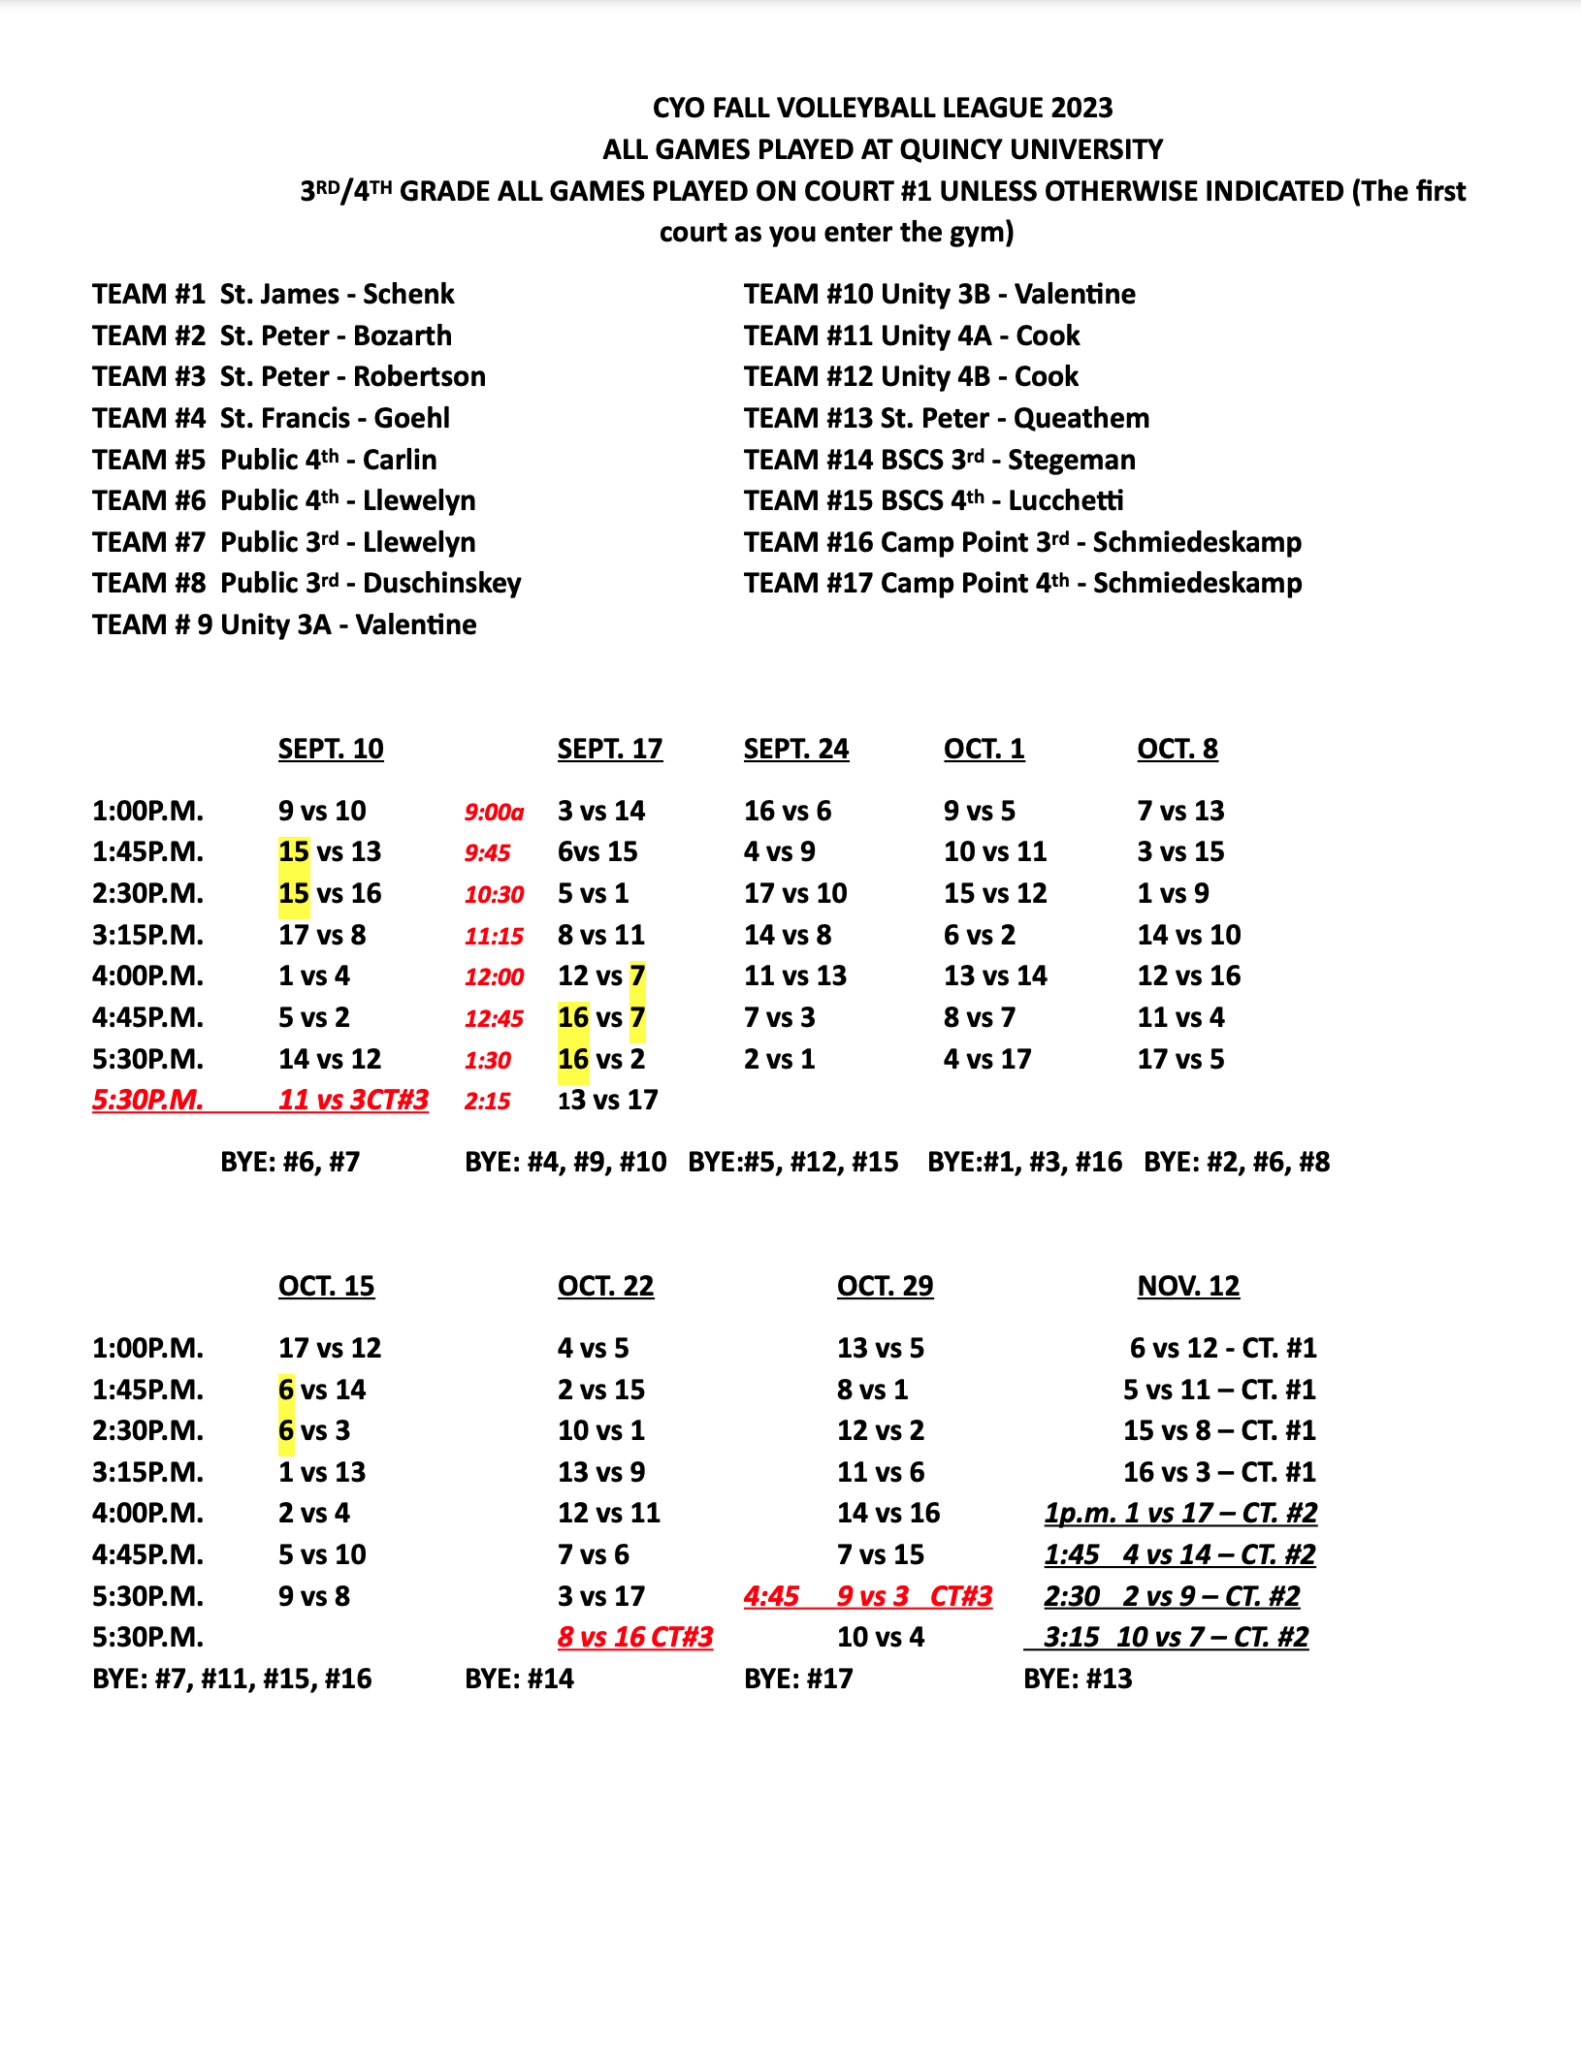 Fall 2023 3rd & 4th Grade Volleyball Schedule